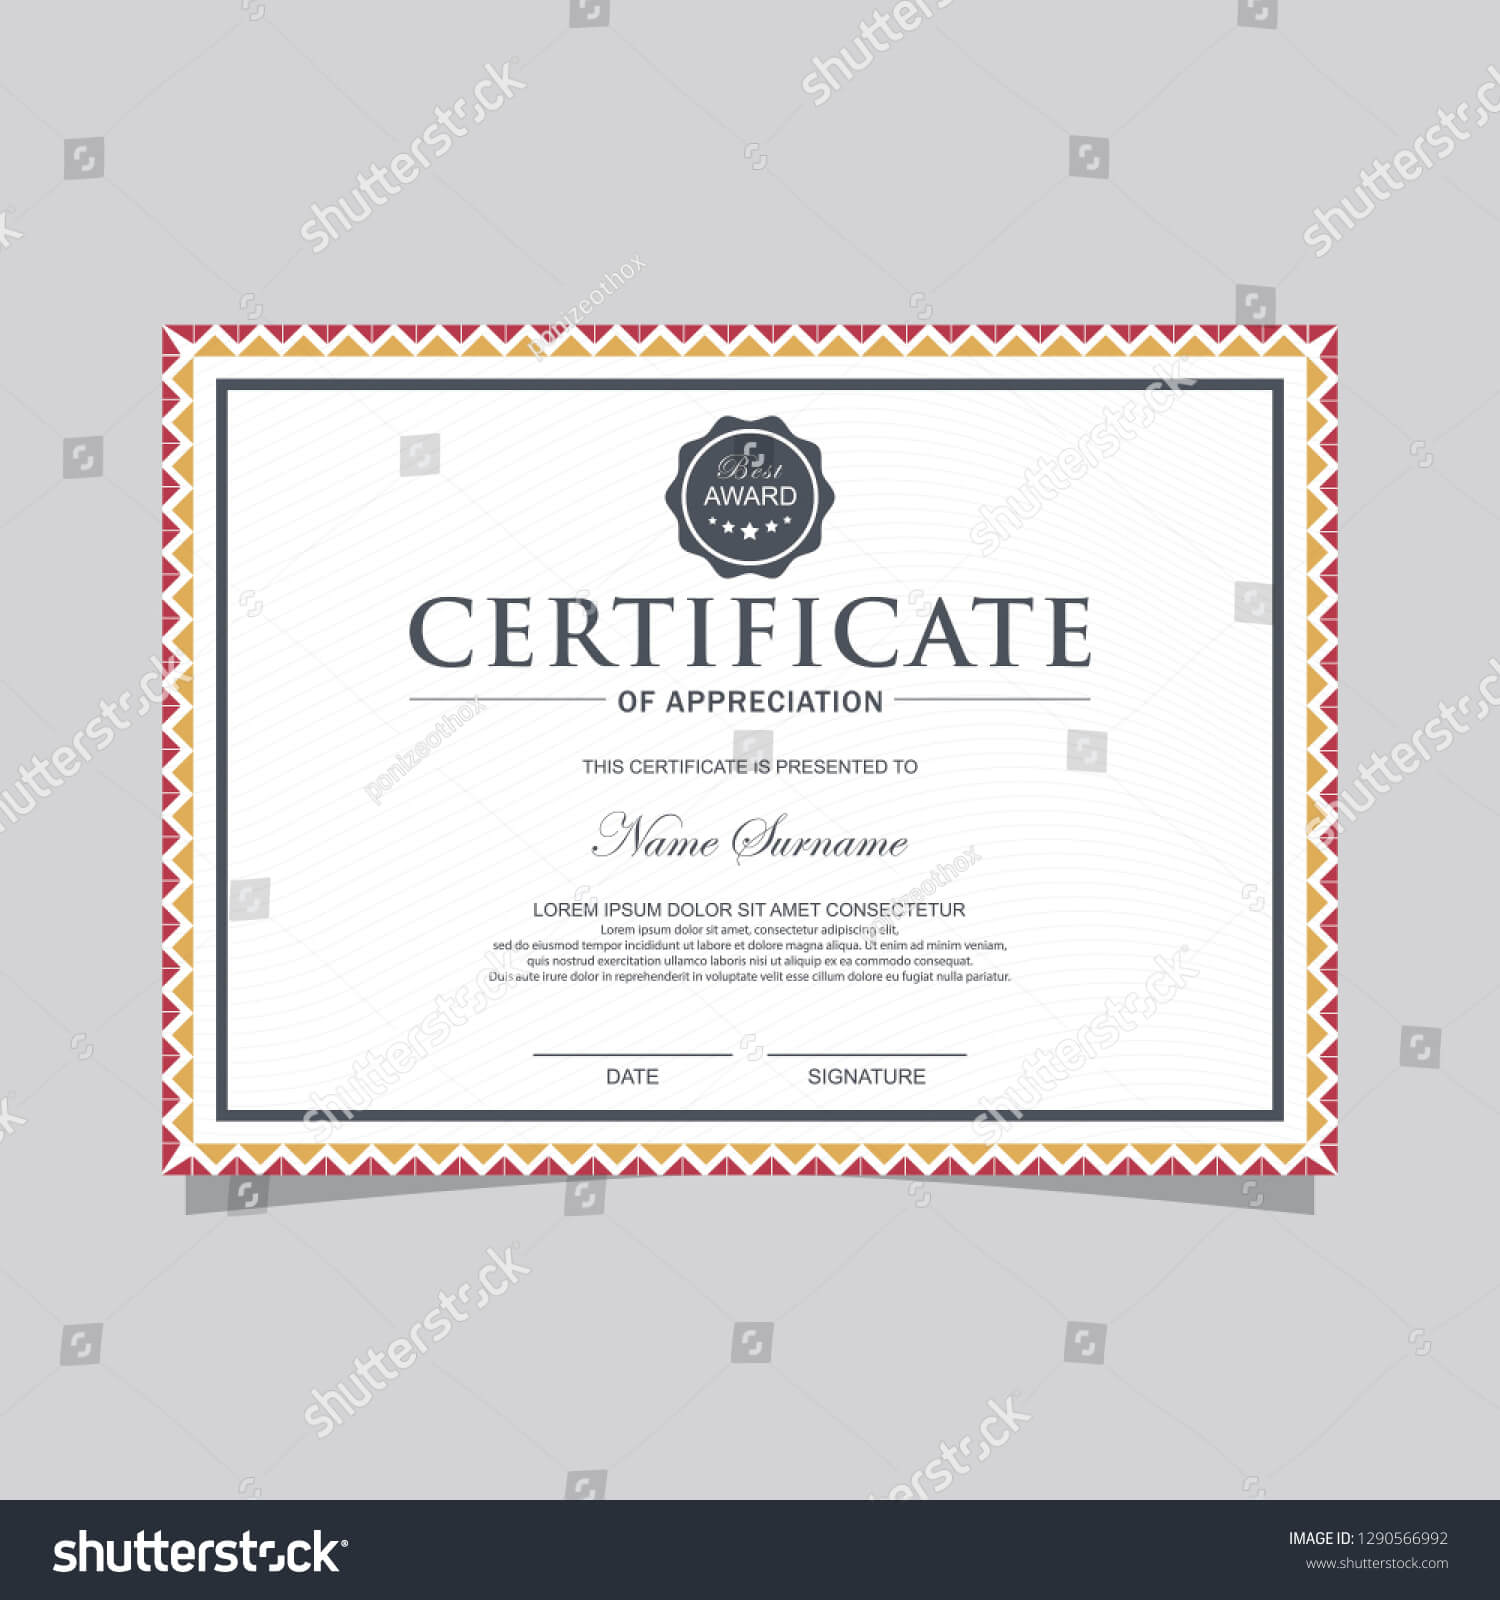 Certificate Template Diploma Currency Border Award | Royalty For Academic Award Certificate Template